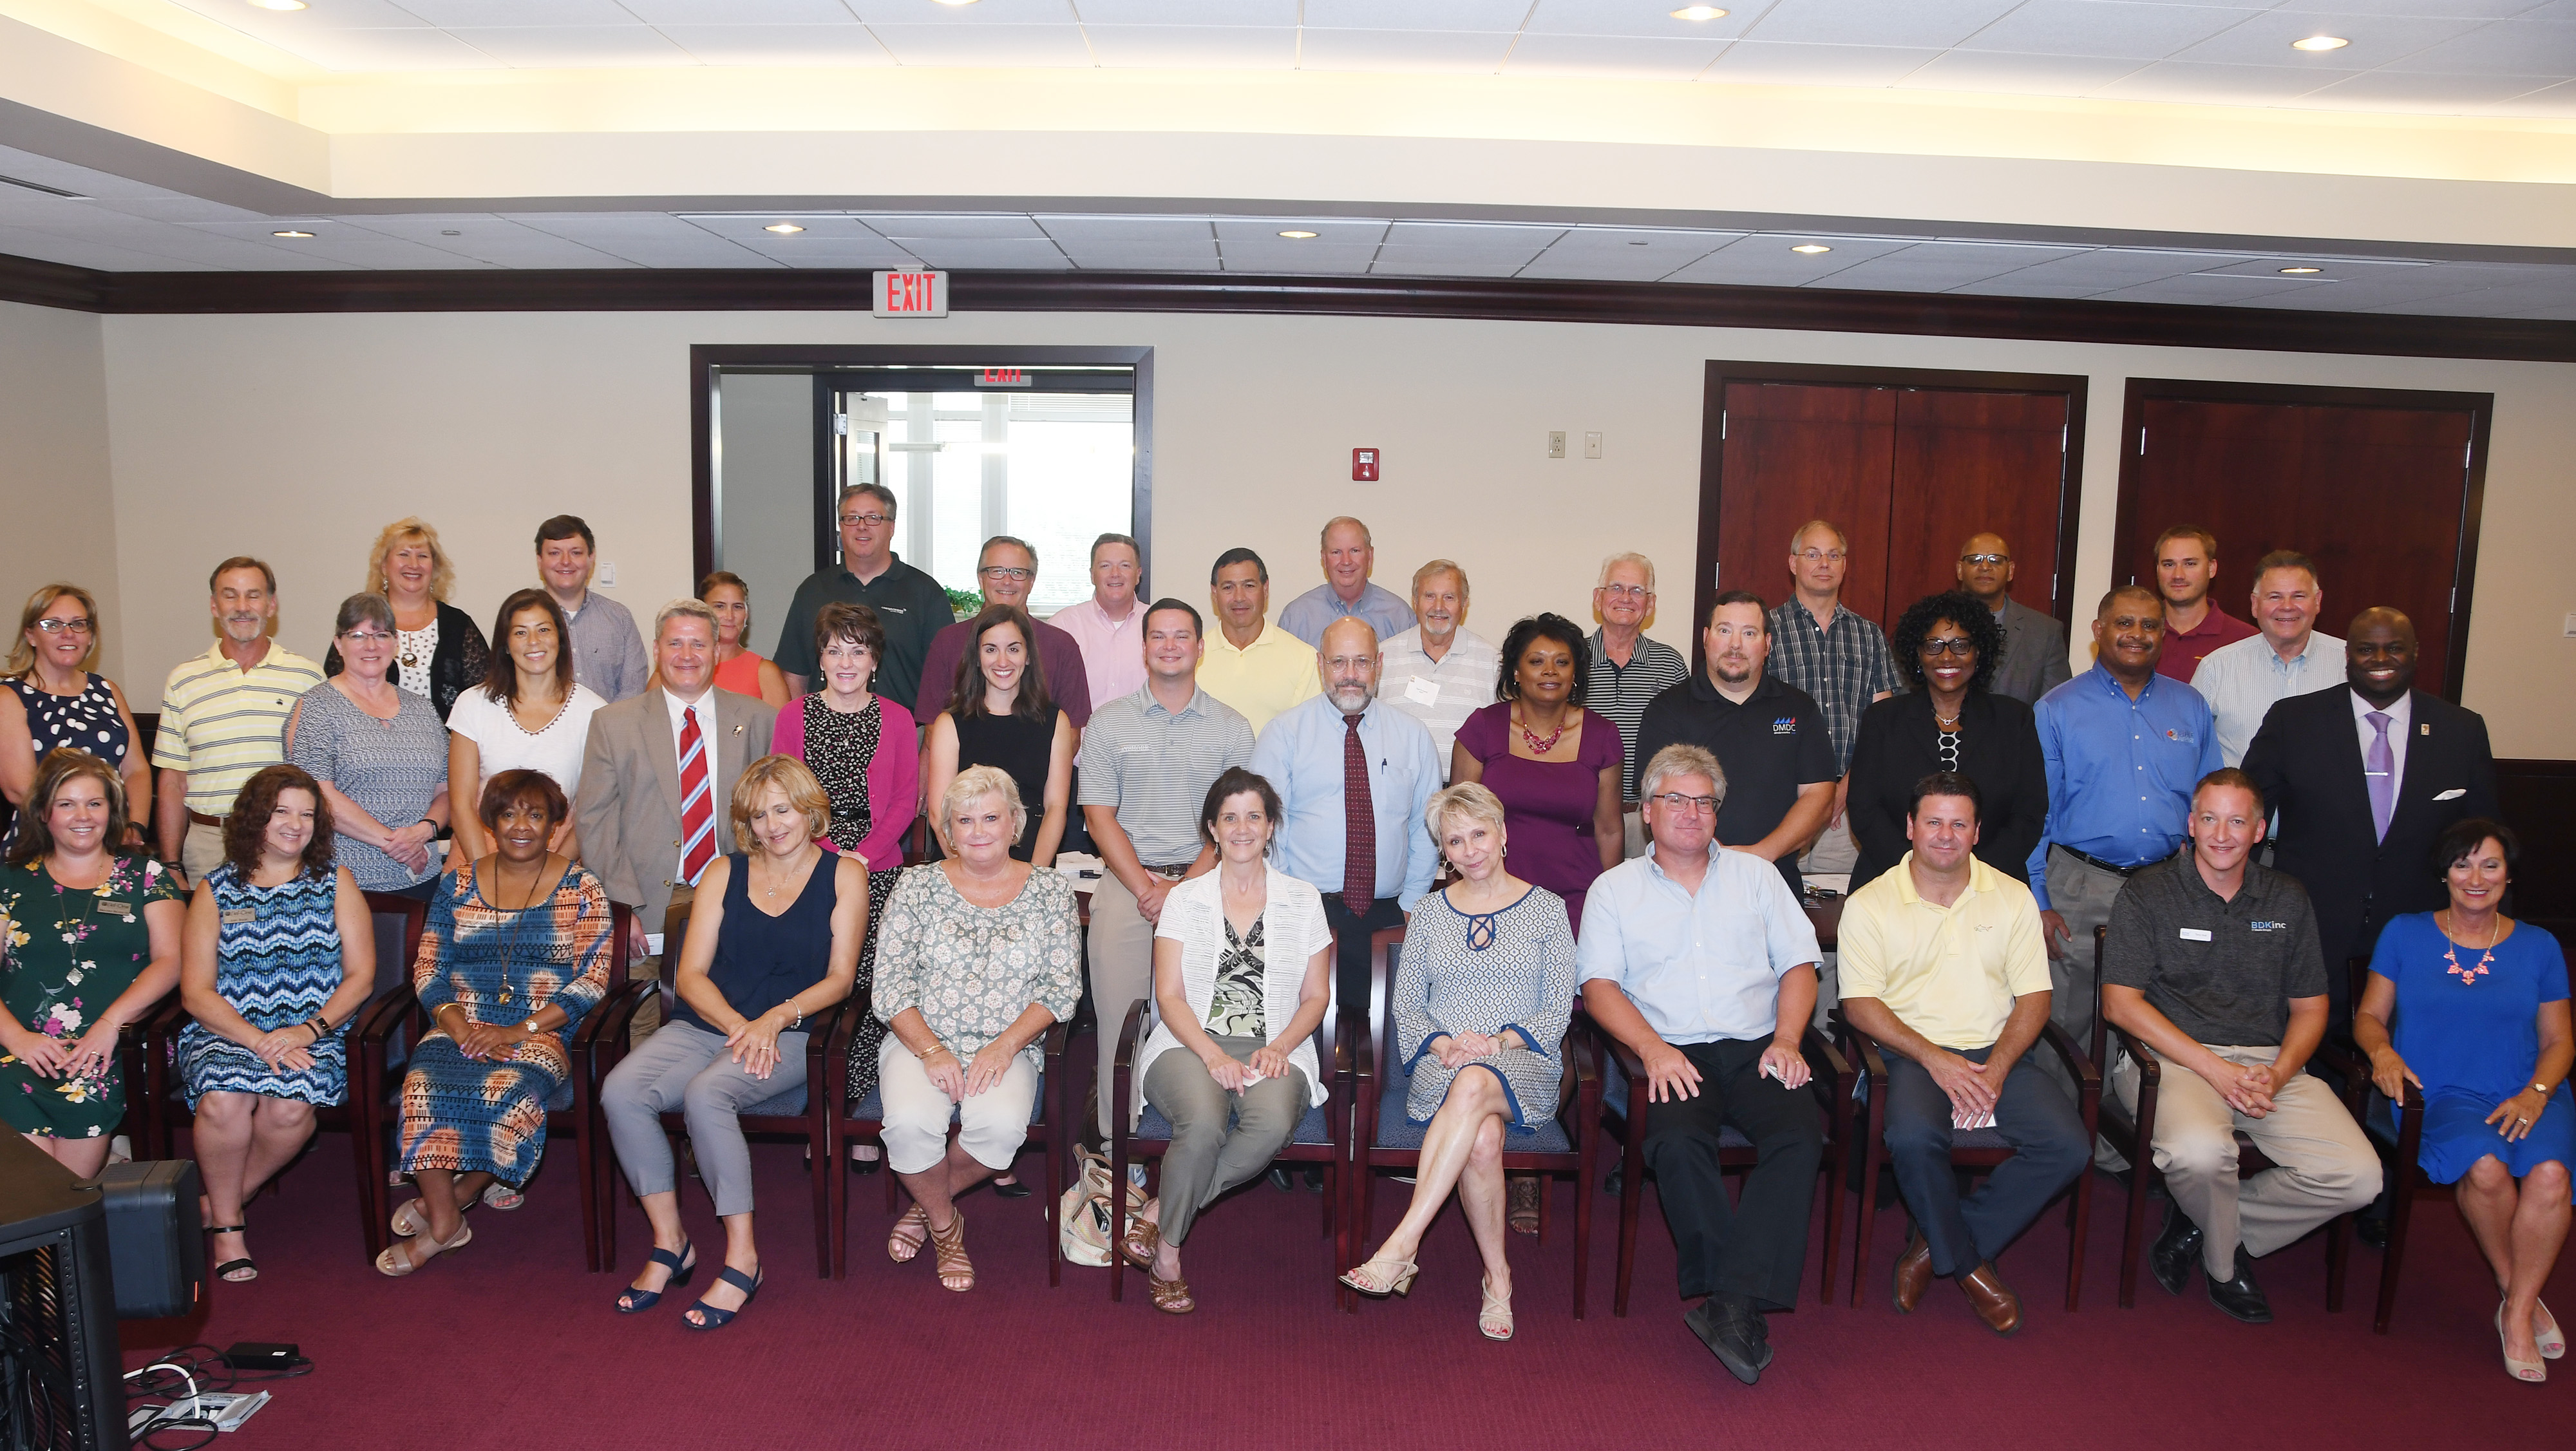 A gathering of the Kent County Plant Managers group met July 17 at DSU and posed for a Kodak moment.